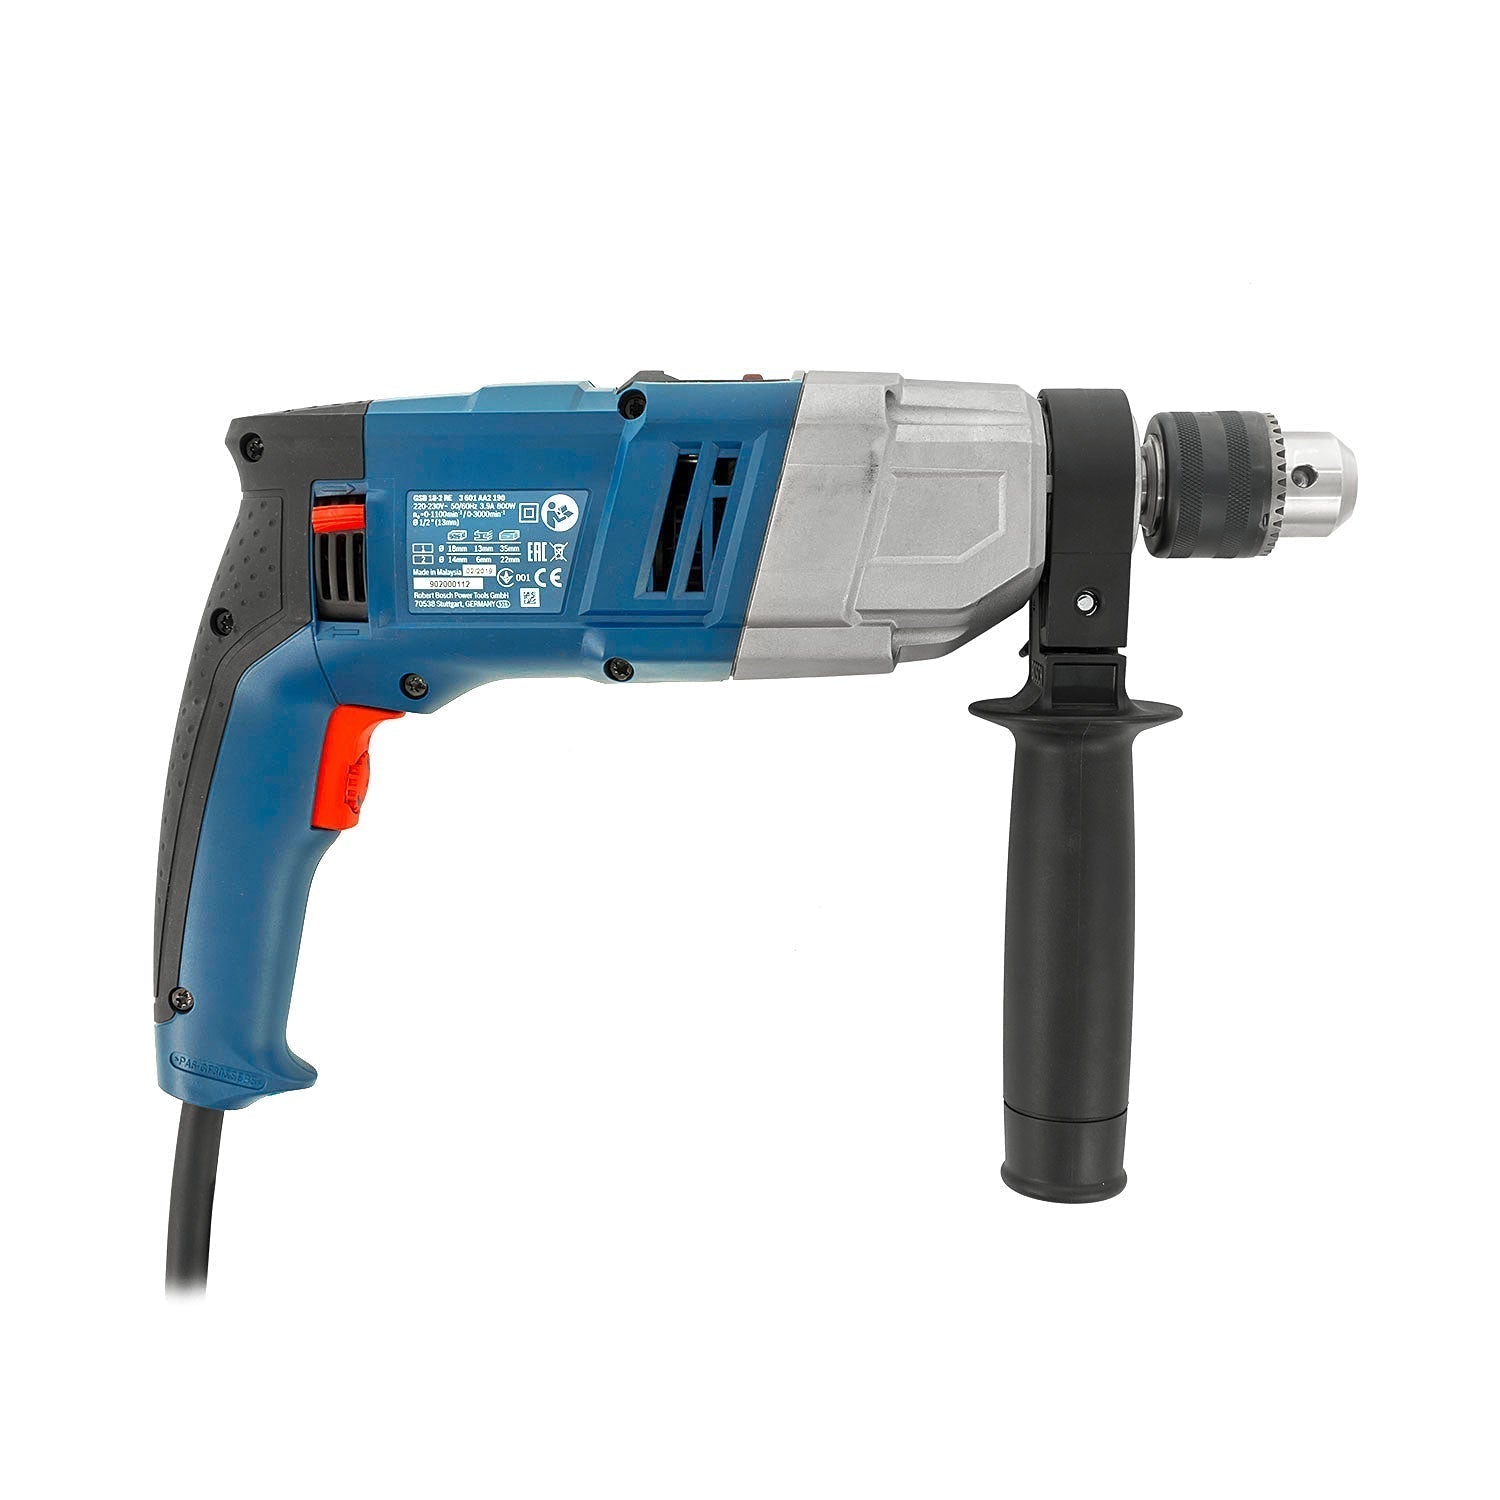 Bosch Professional Impact Drill GSB 18-2 RE 06011A2190 Power Tool Services